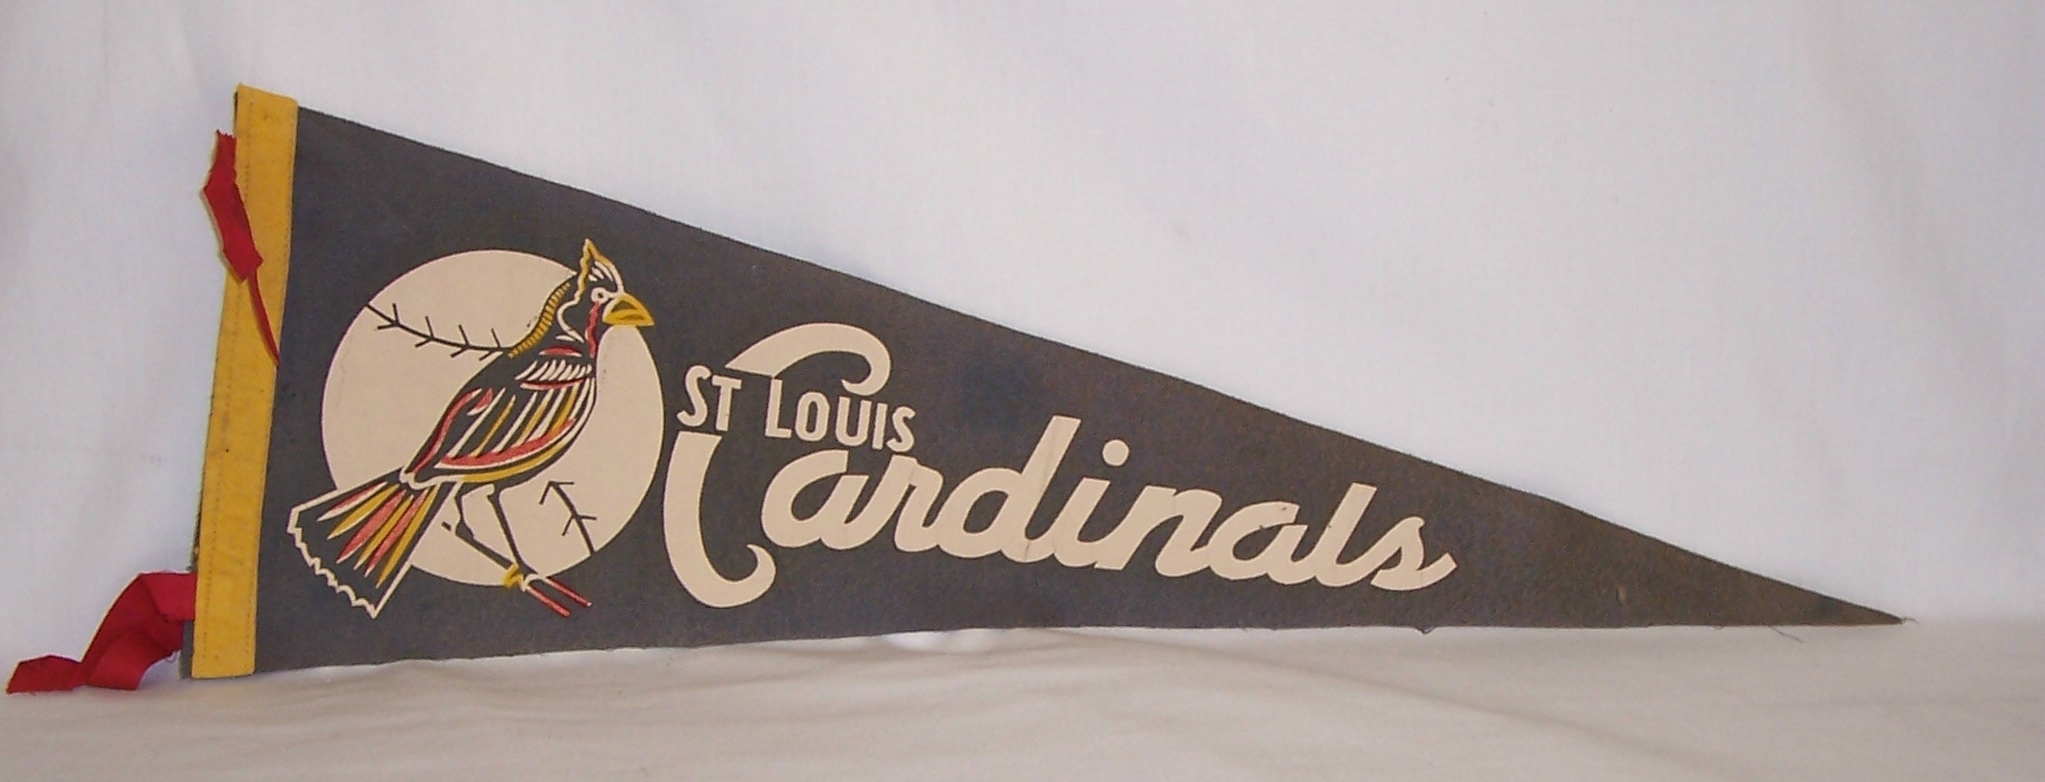 VINTAGE St. Louis Cardinals Baseball Pennant Very Old! Looks Great